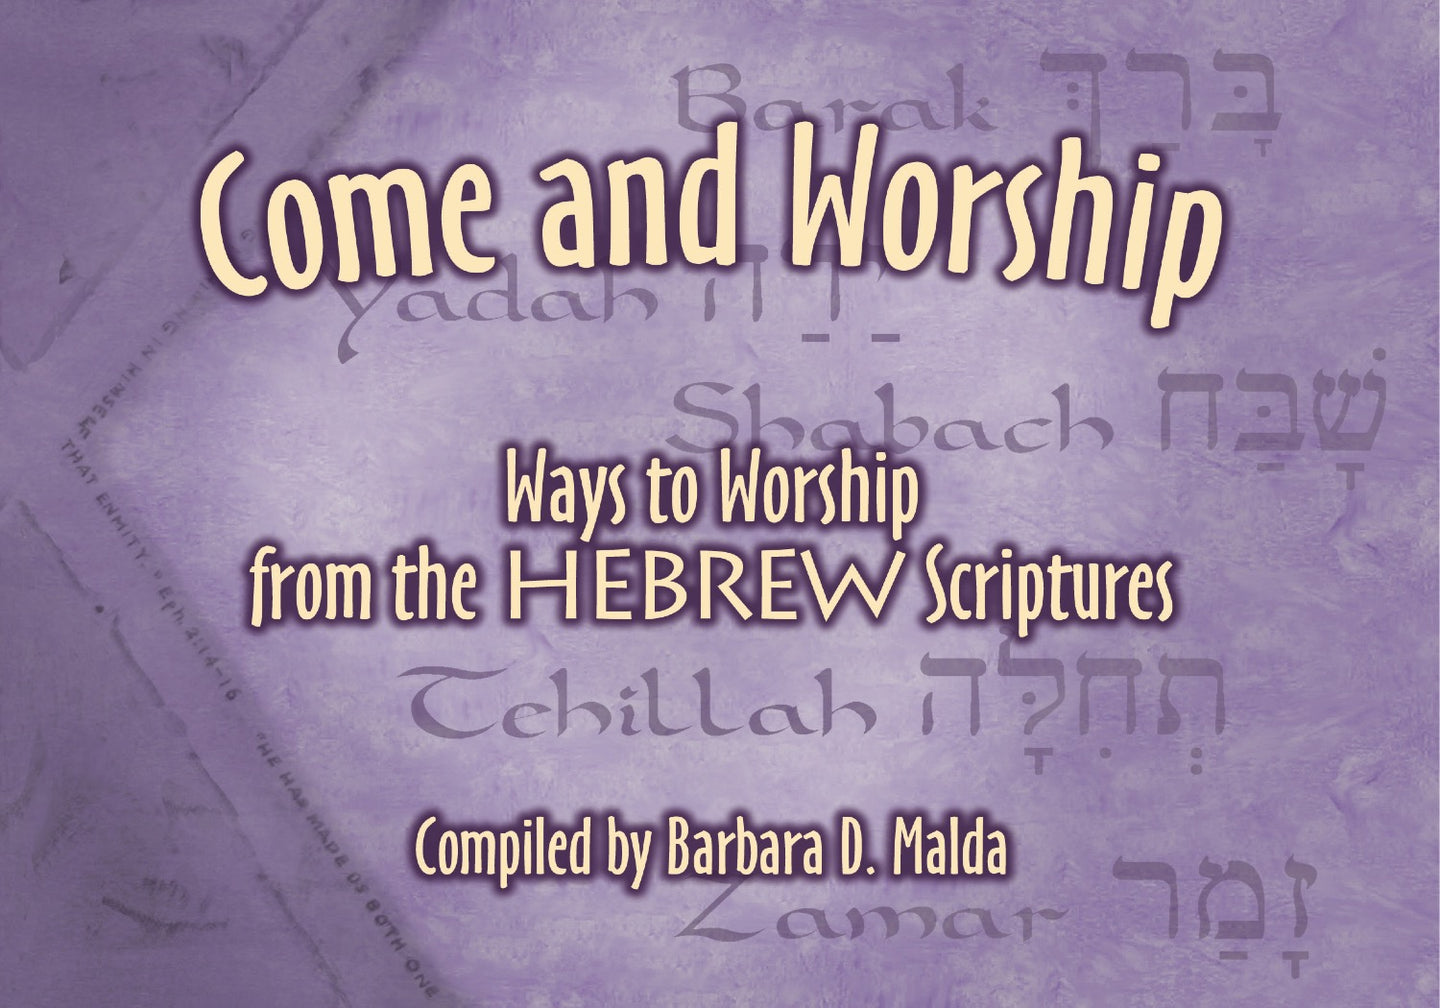 Come and Worship: Ways to Worship from the Hebrew Scriptures by Barbara Malda